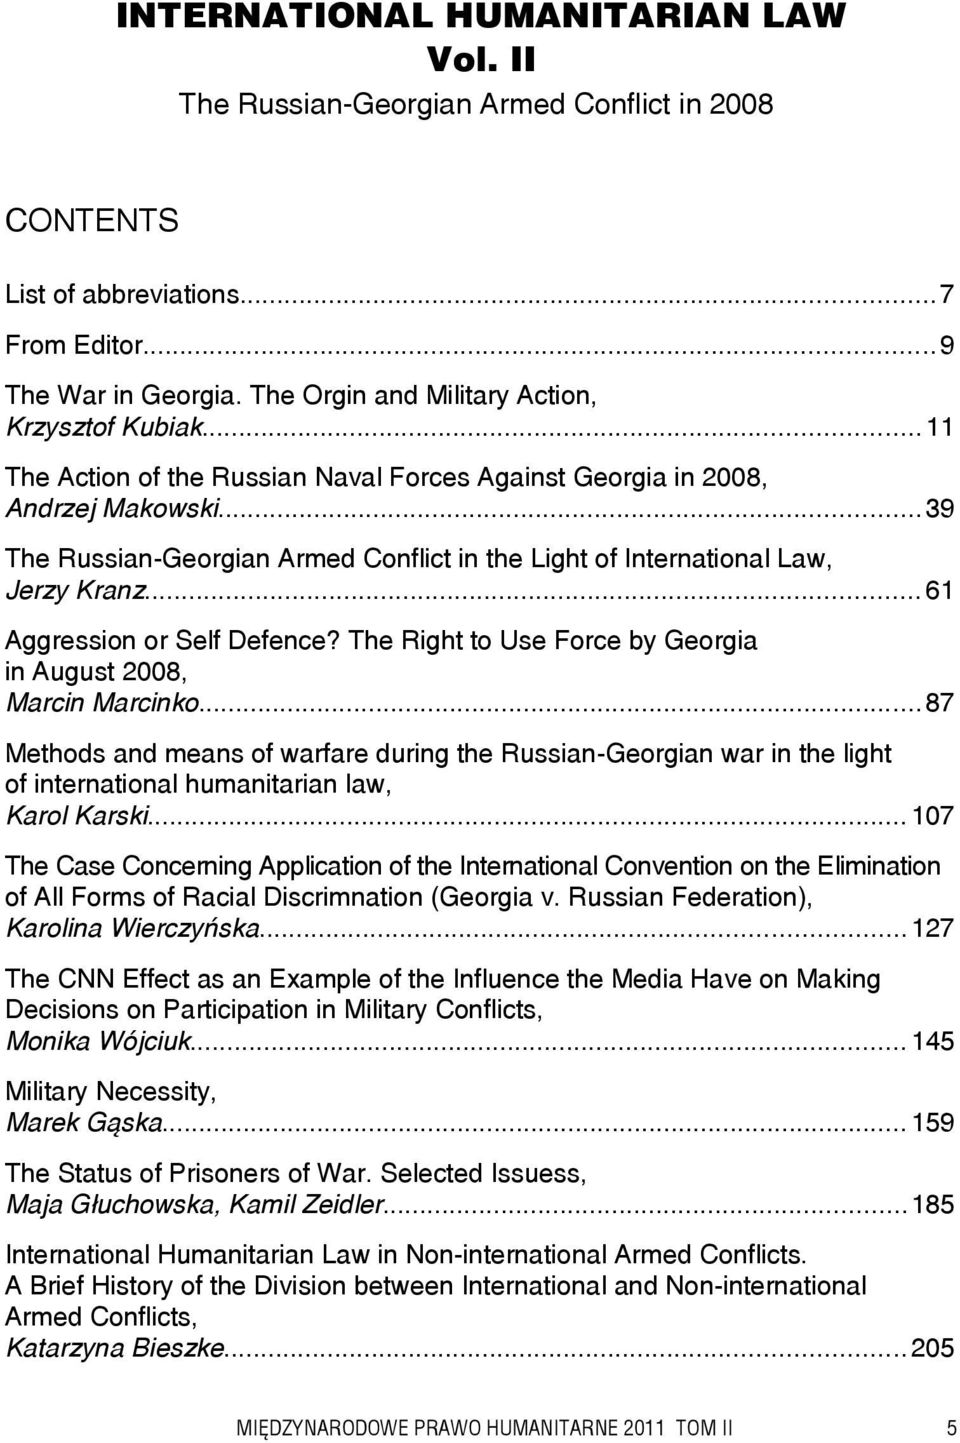 ..39 The Russian-Georgian Armed Conflict in the Light of International Law, Jerzy Kranz...61 Aggression or Self Defence? The Right to Use Force by Georgia in August 2008, Marcin Marcinko.